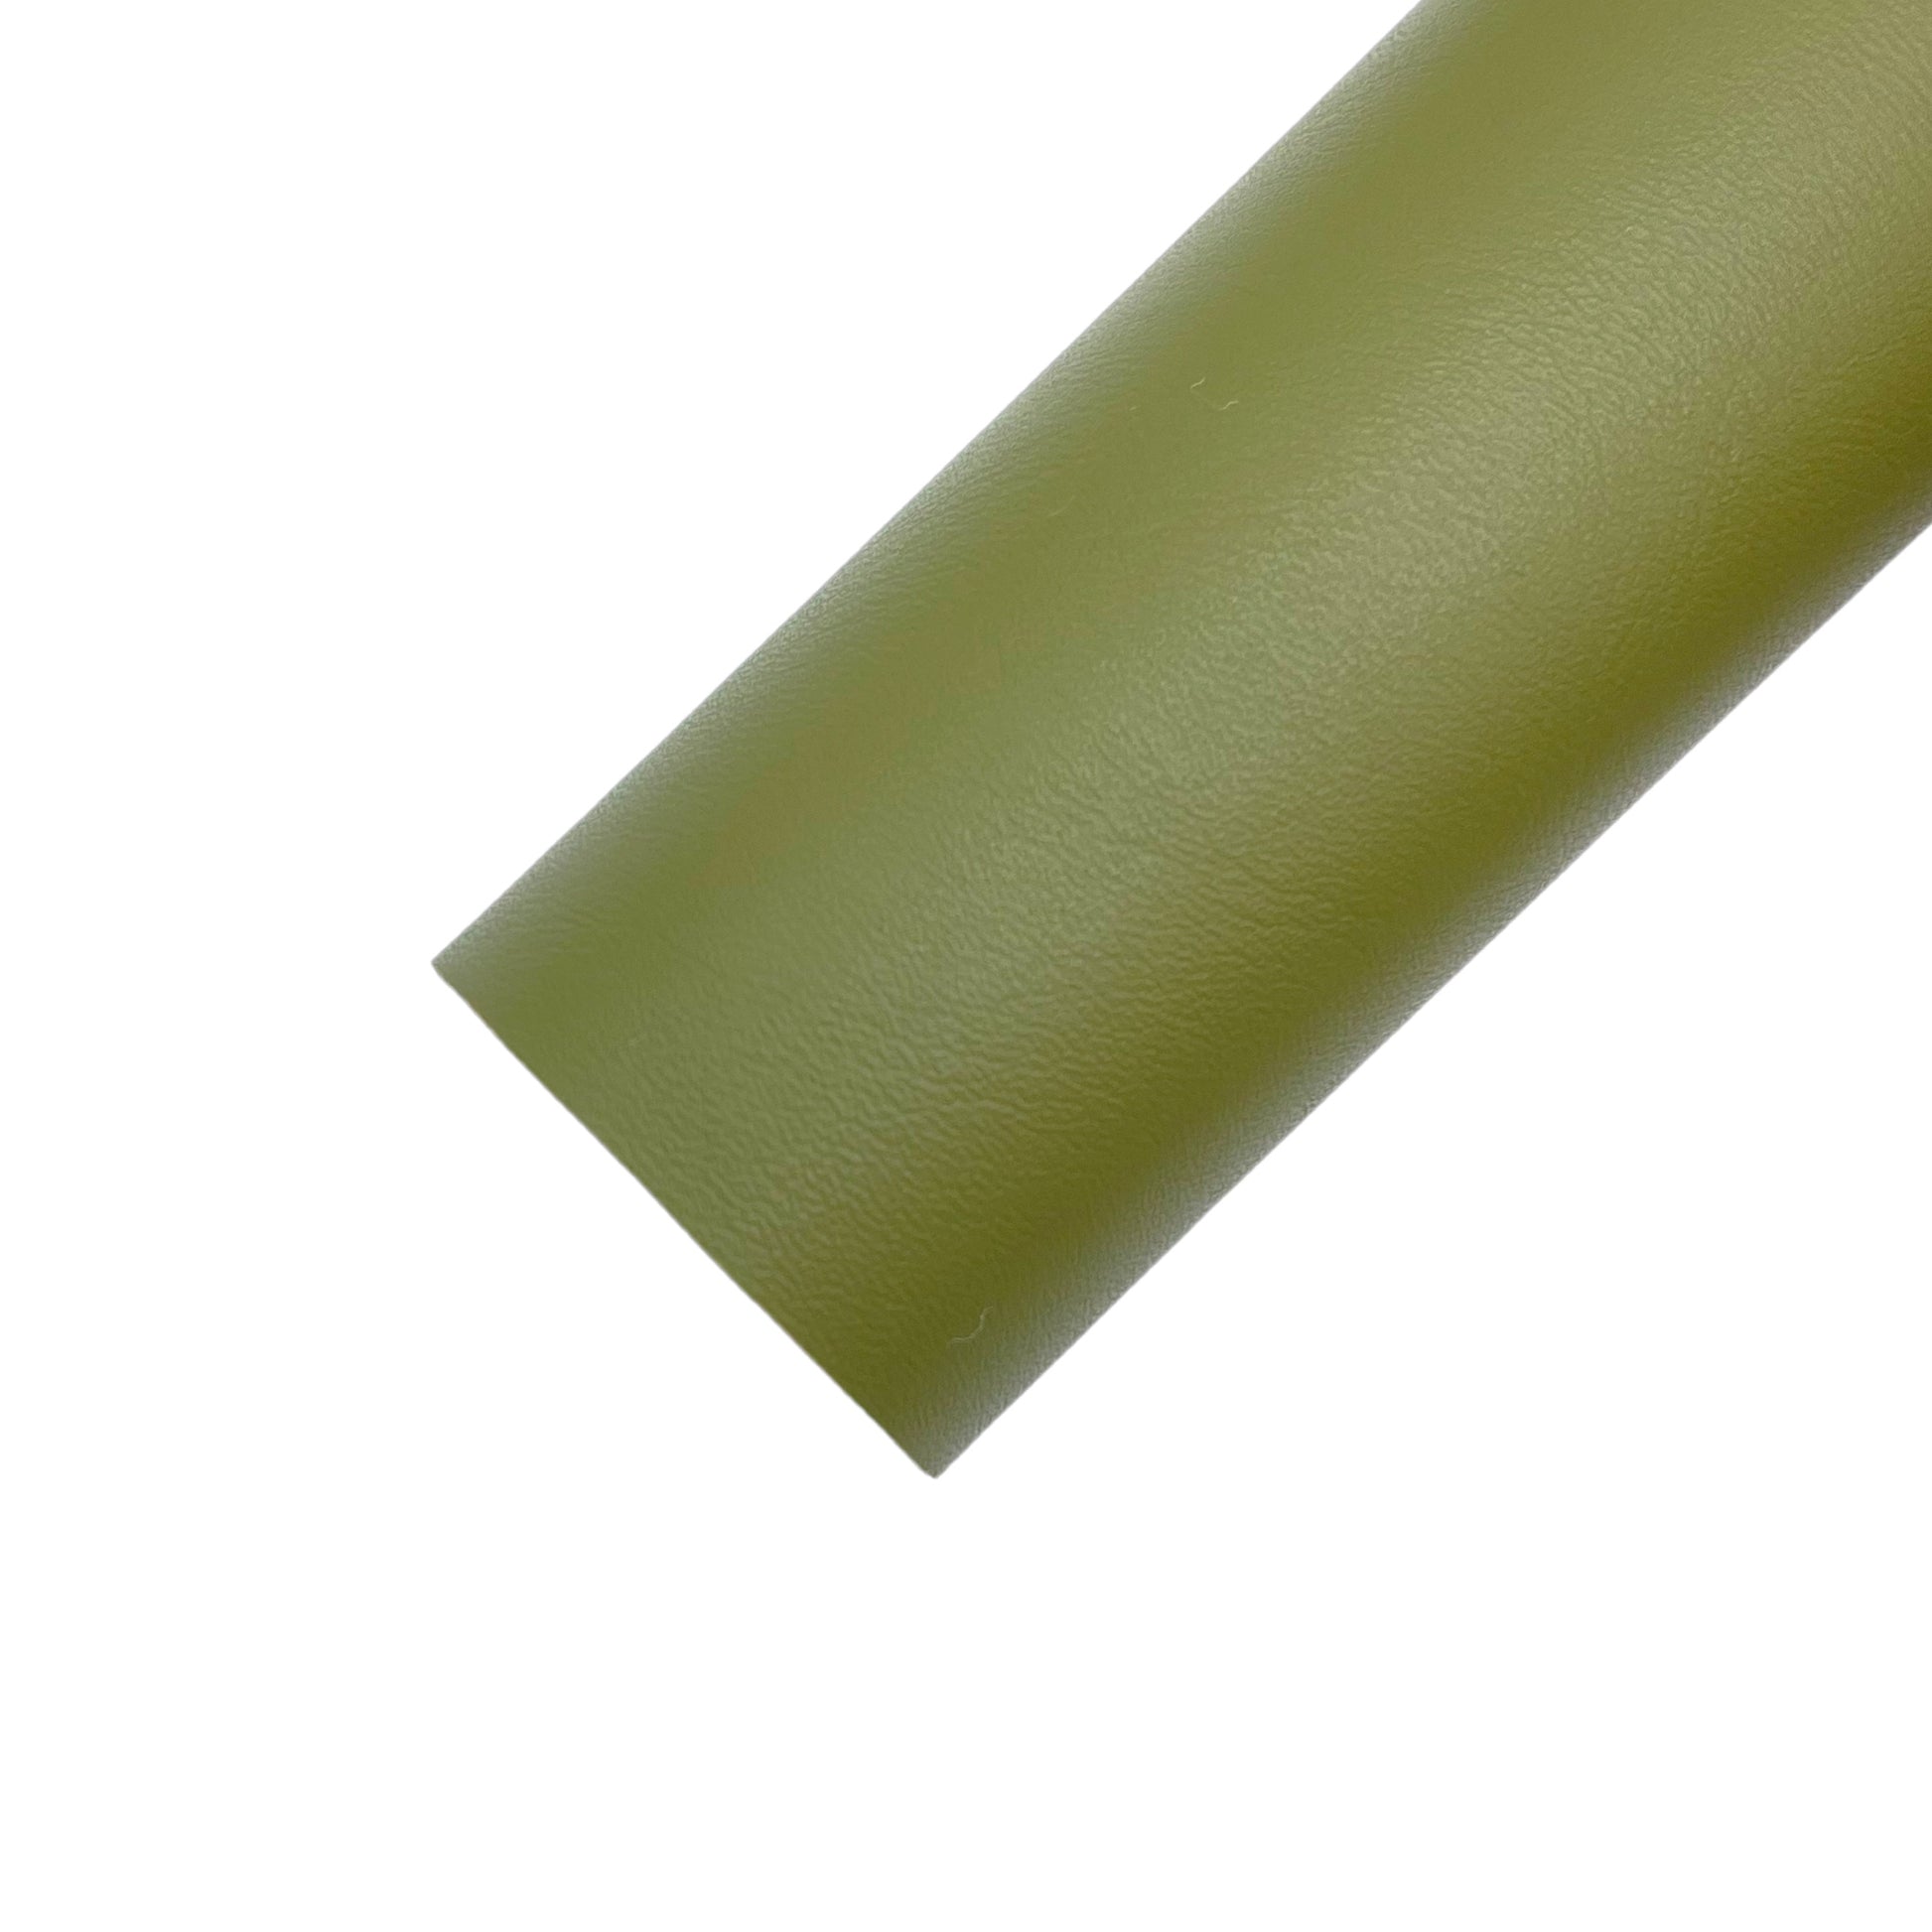 Rolled smooth olive green faux leather sheet.